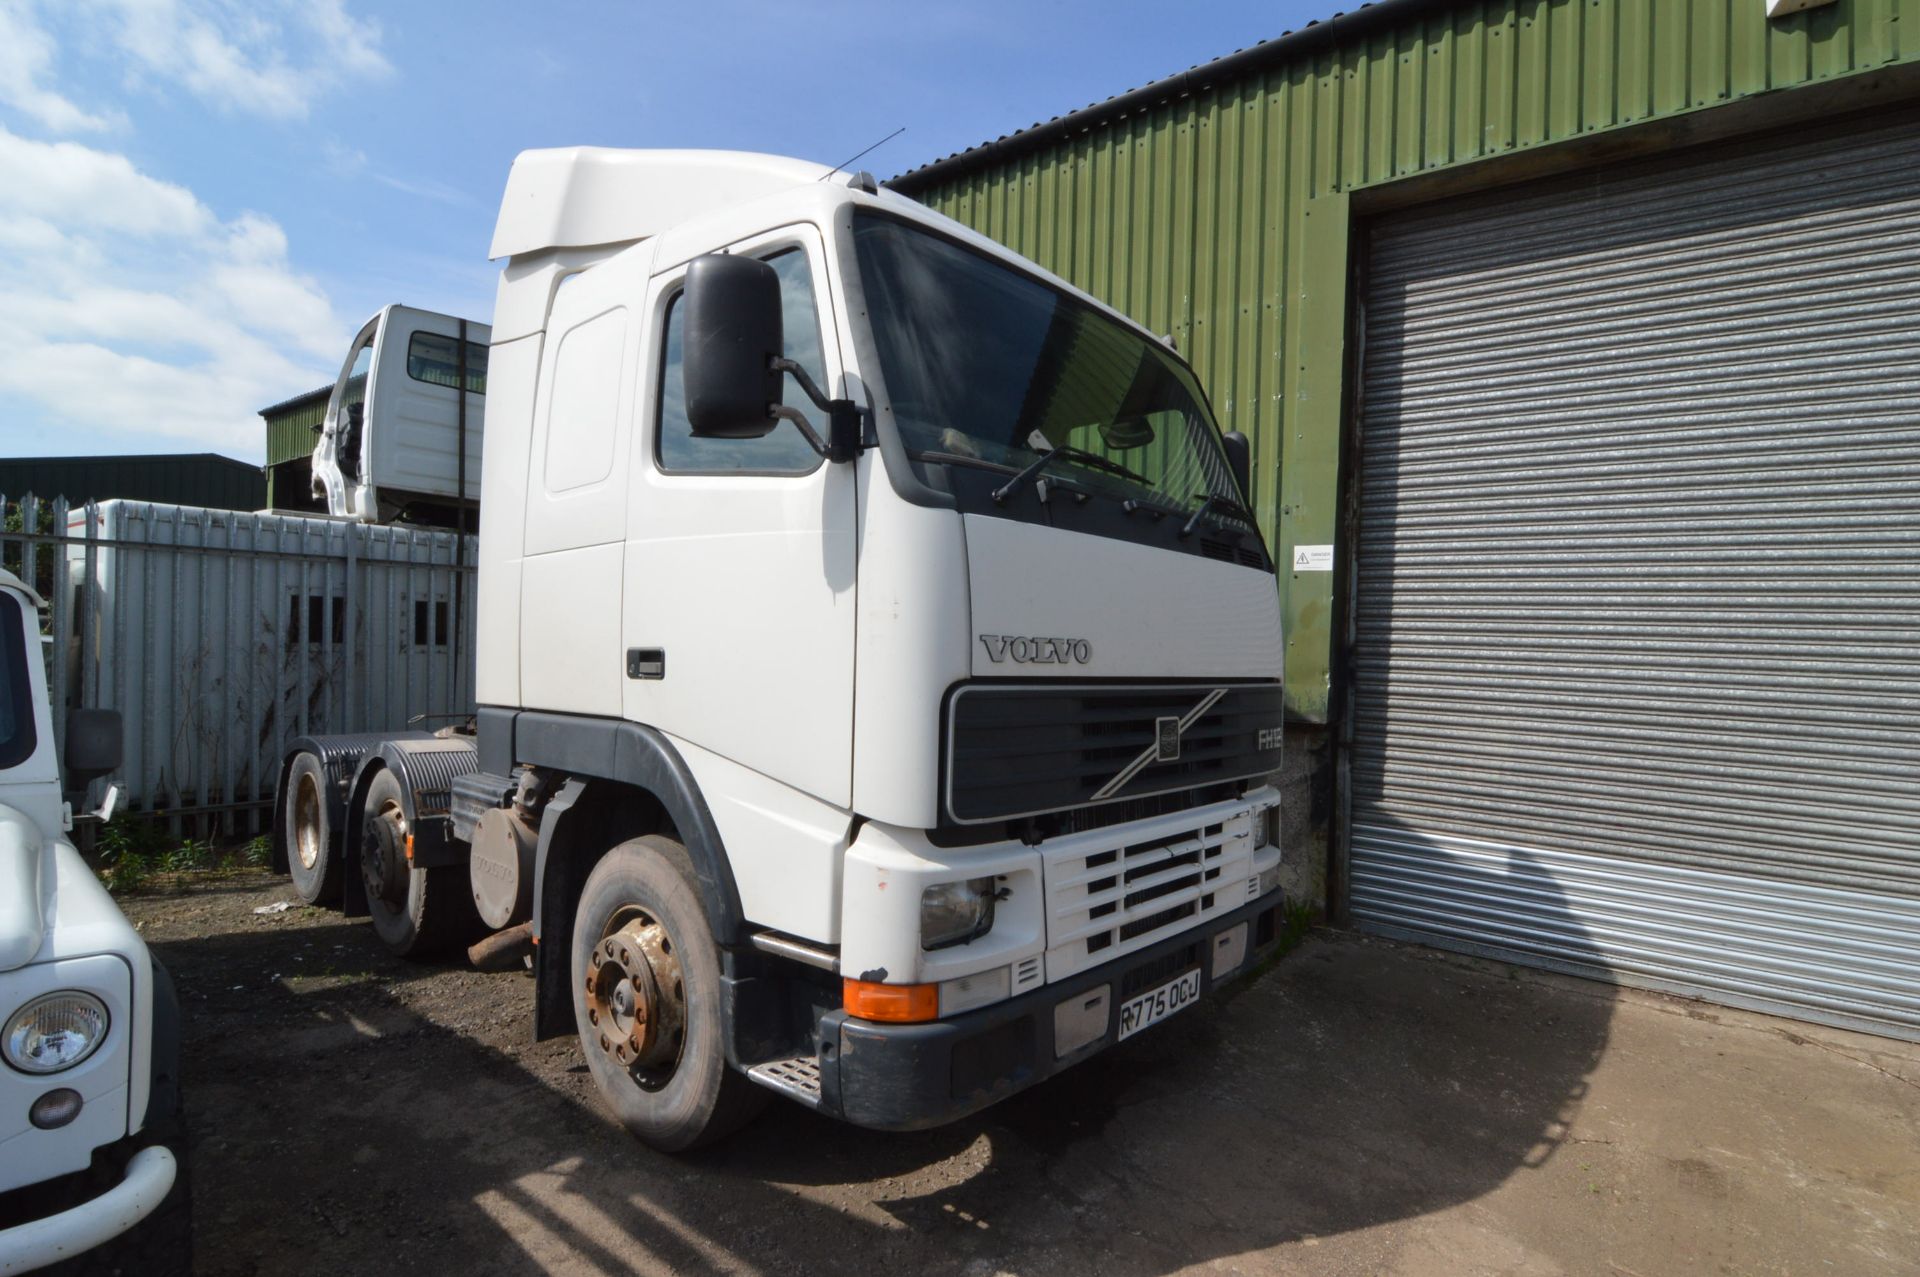 Volvo FH12.240 TRACTOR UNIT, registration no. R775 OCJ, date first registered 01/01/98, test to